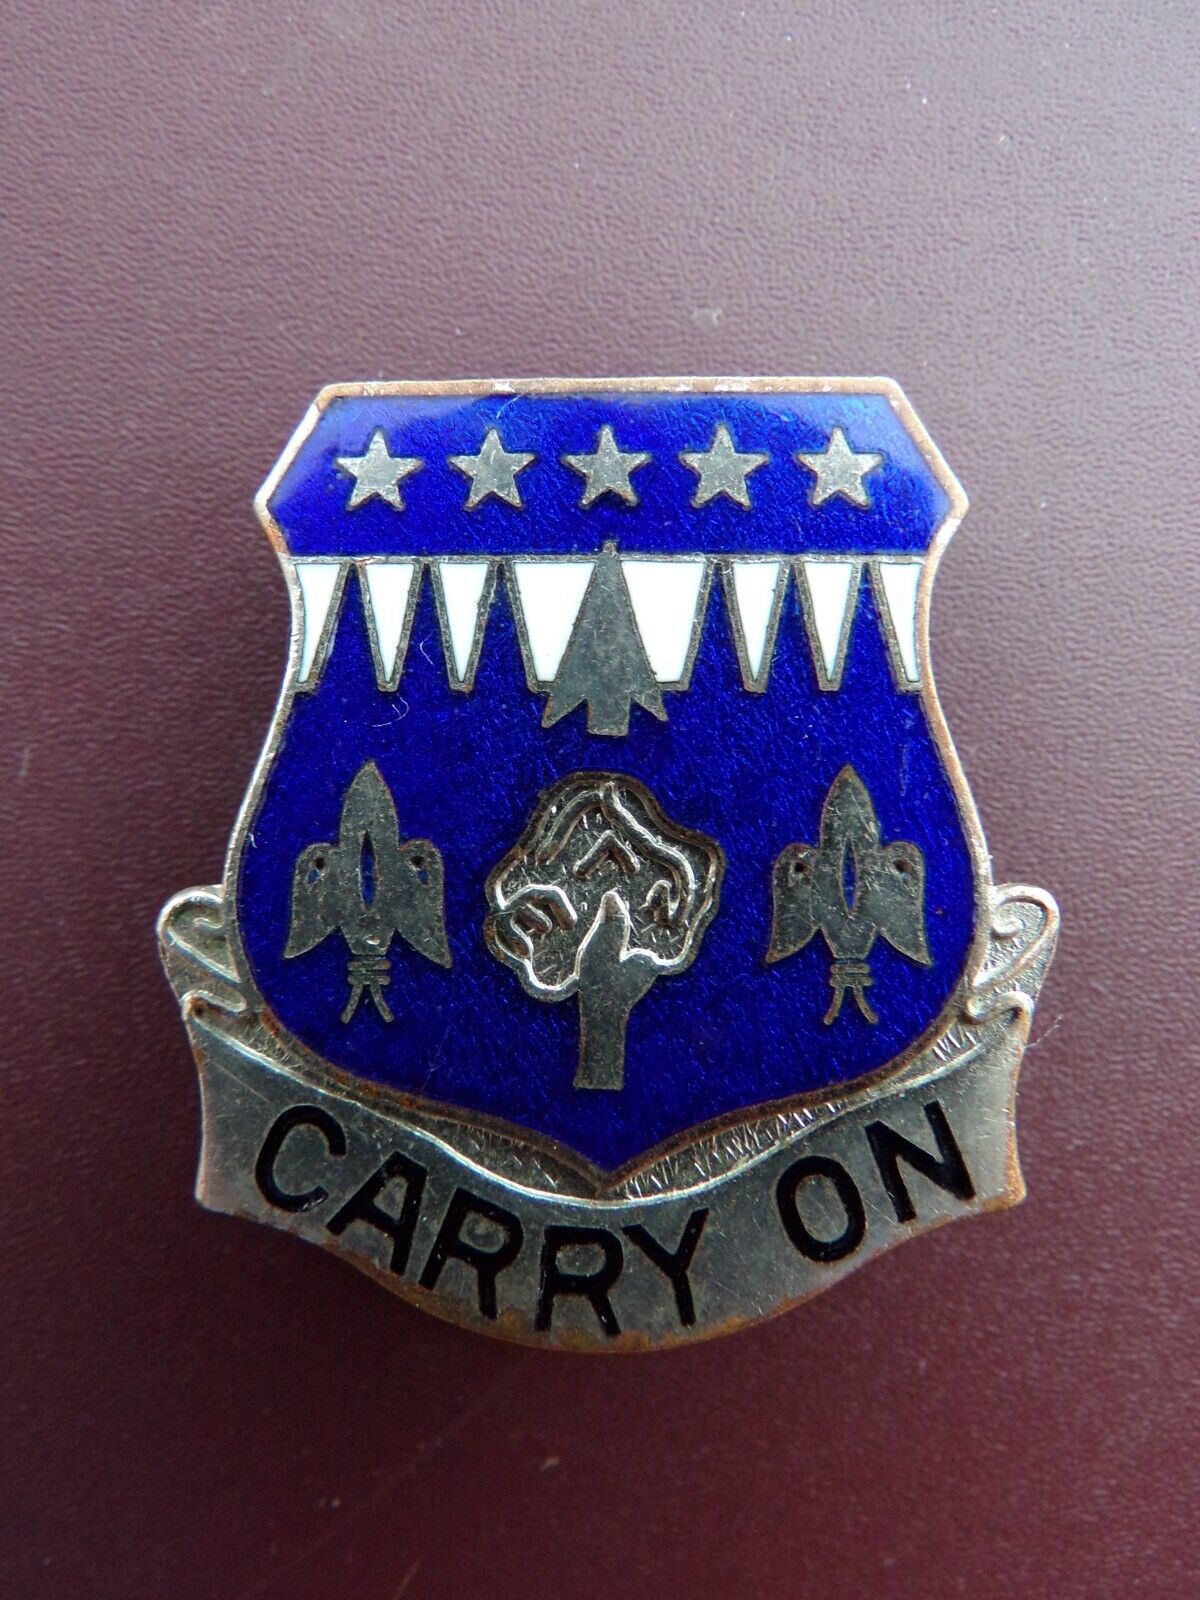 WWII US Army 359th Infantry Regt Crest Badge Unit Pin Uniform DI Military DUI PB